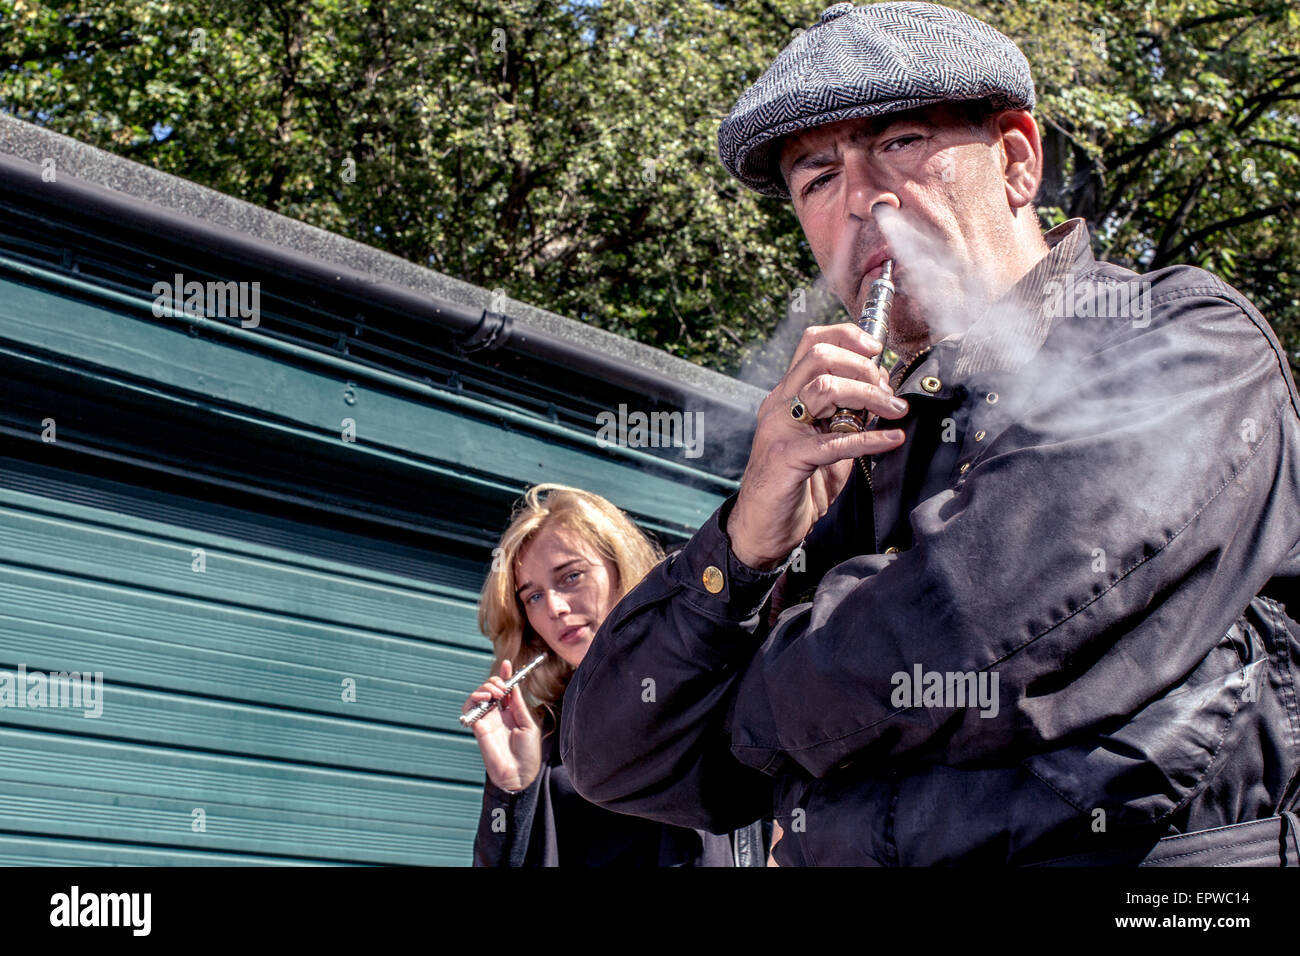 Man and woman standing smoking e-cigarettes outdoors with a lowe angle view off the middle-aged man exhaling smoke from his nost Stock Photo